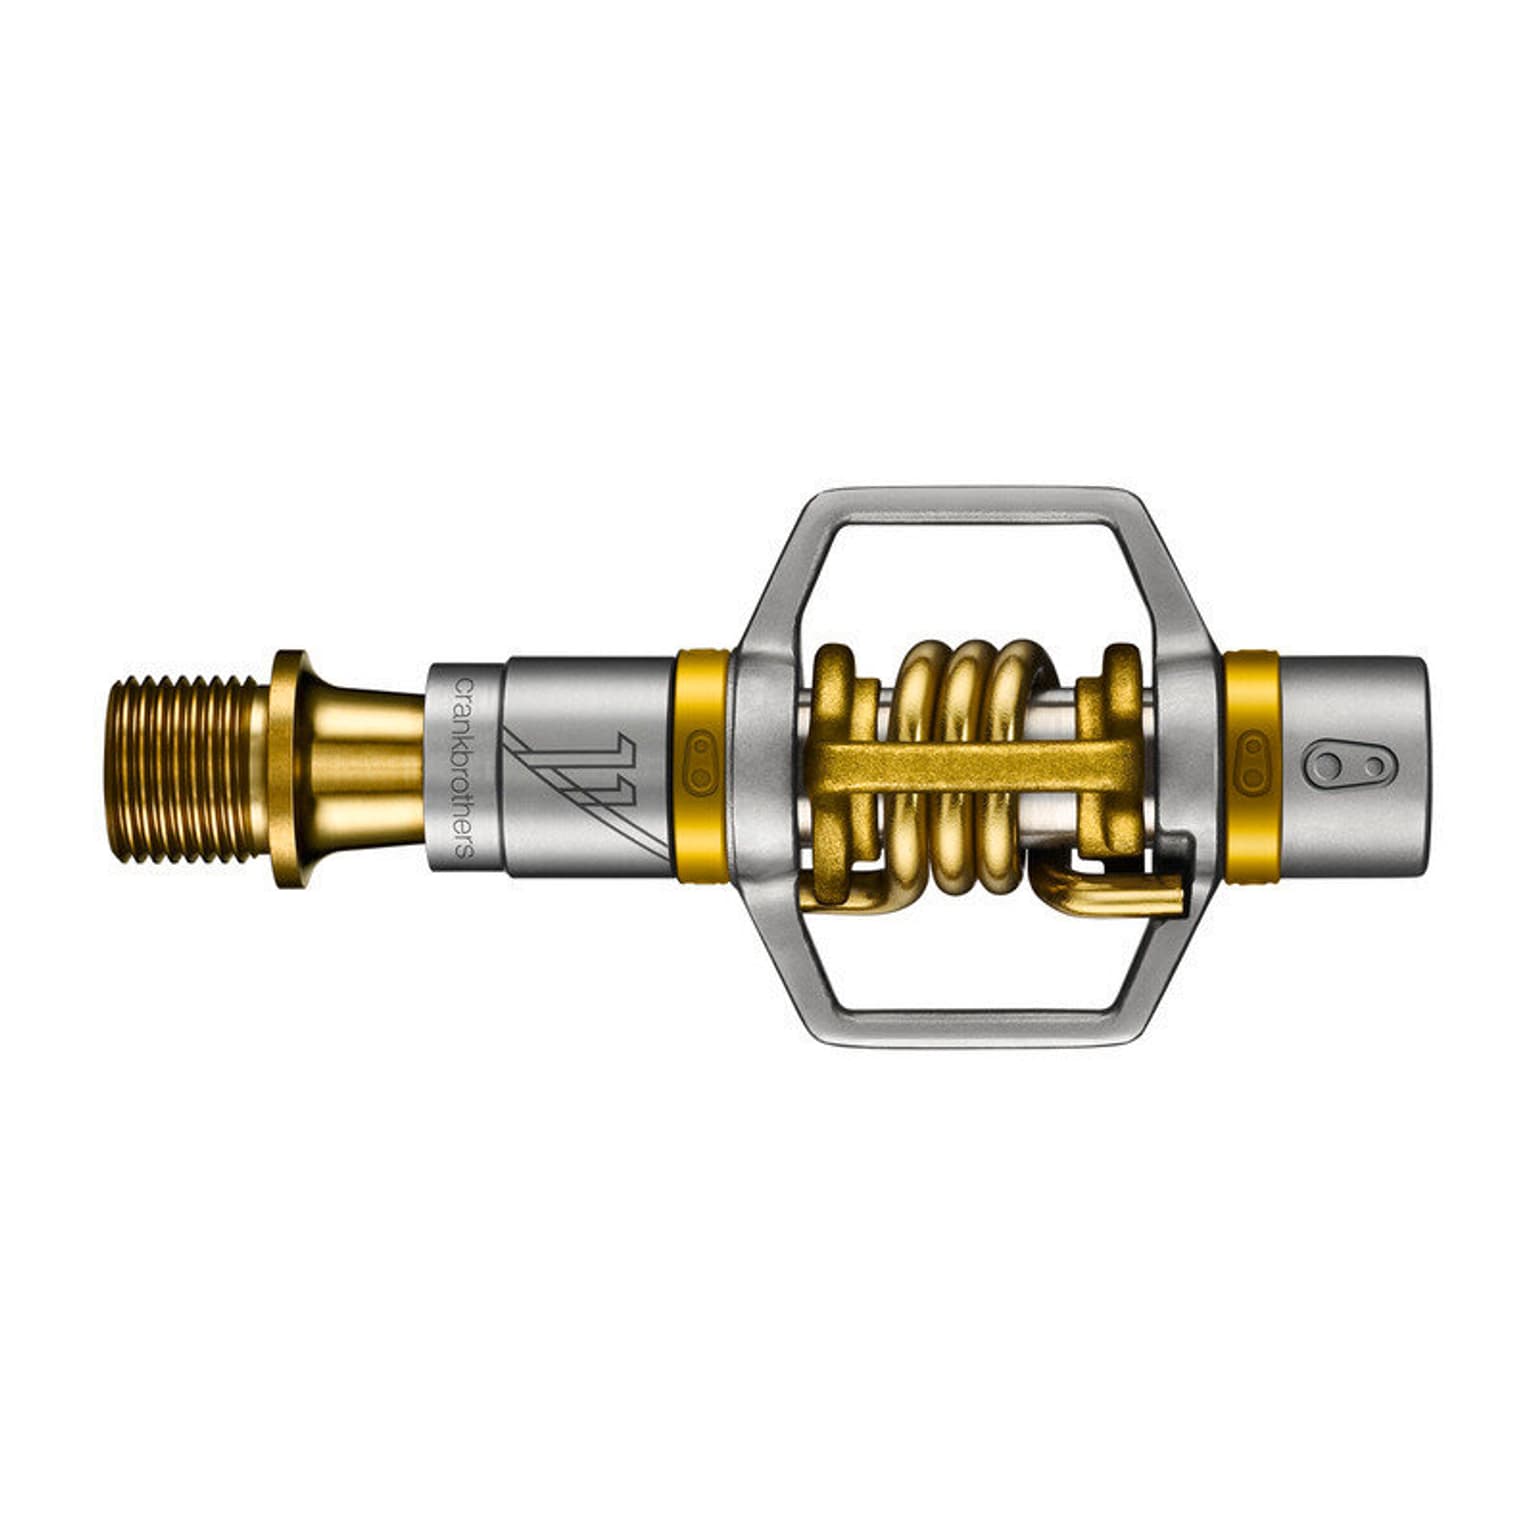 crankbrothers crankbrothers Pedale Egg Beater 11 Pedali 1